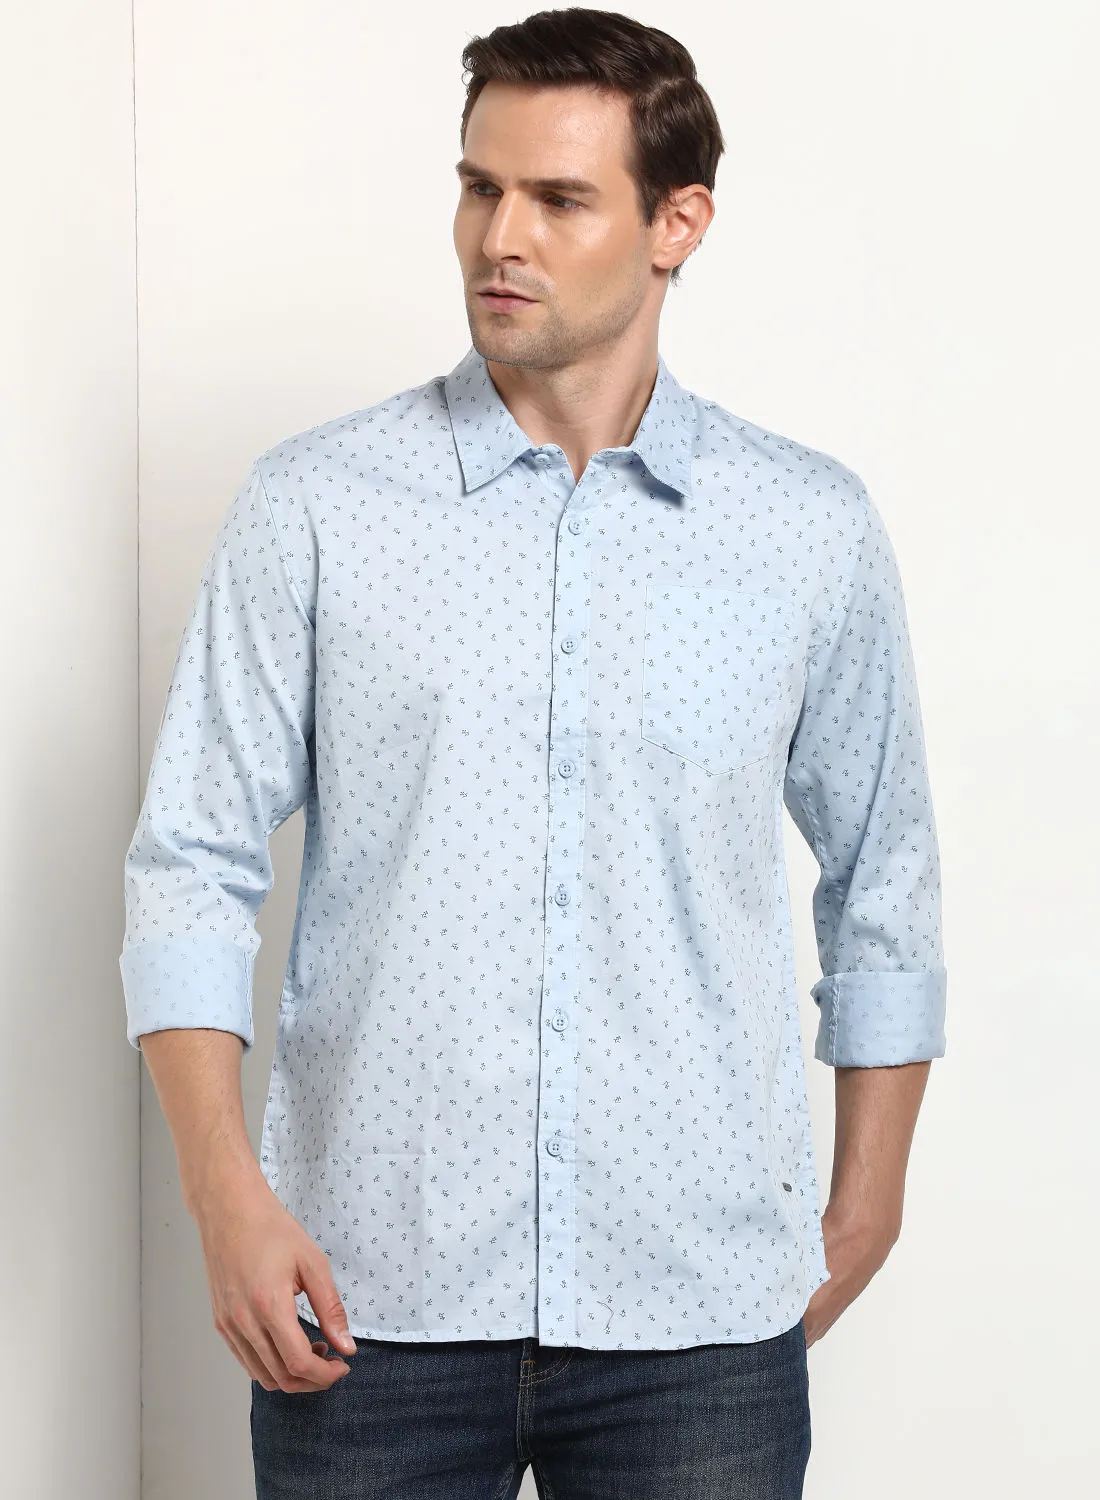 ABOF Casual All Over Printed Slim Fit Shirt Blue